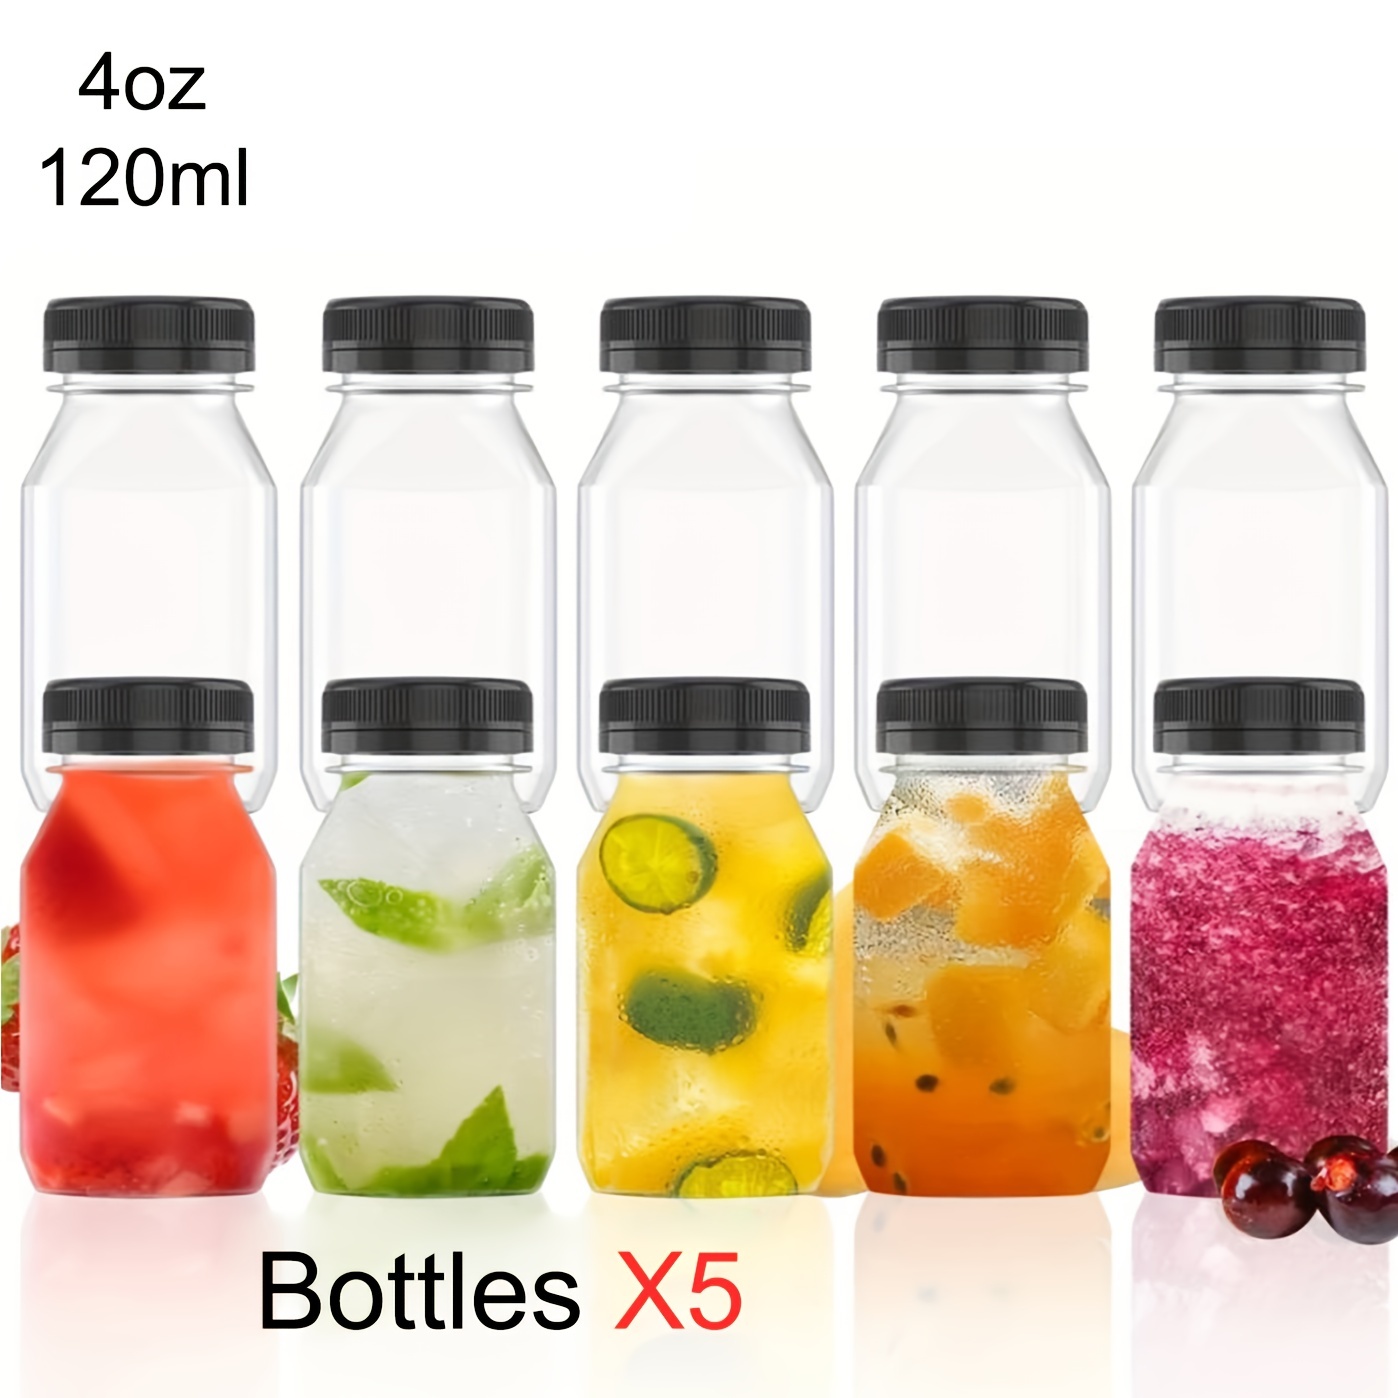 Reusable Juice Bottles, Set of 4 Leak-Proof Juice Containers with